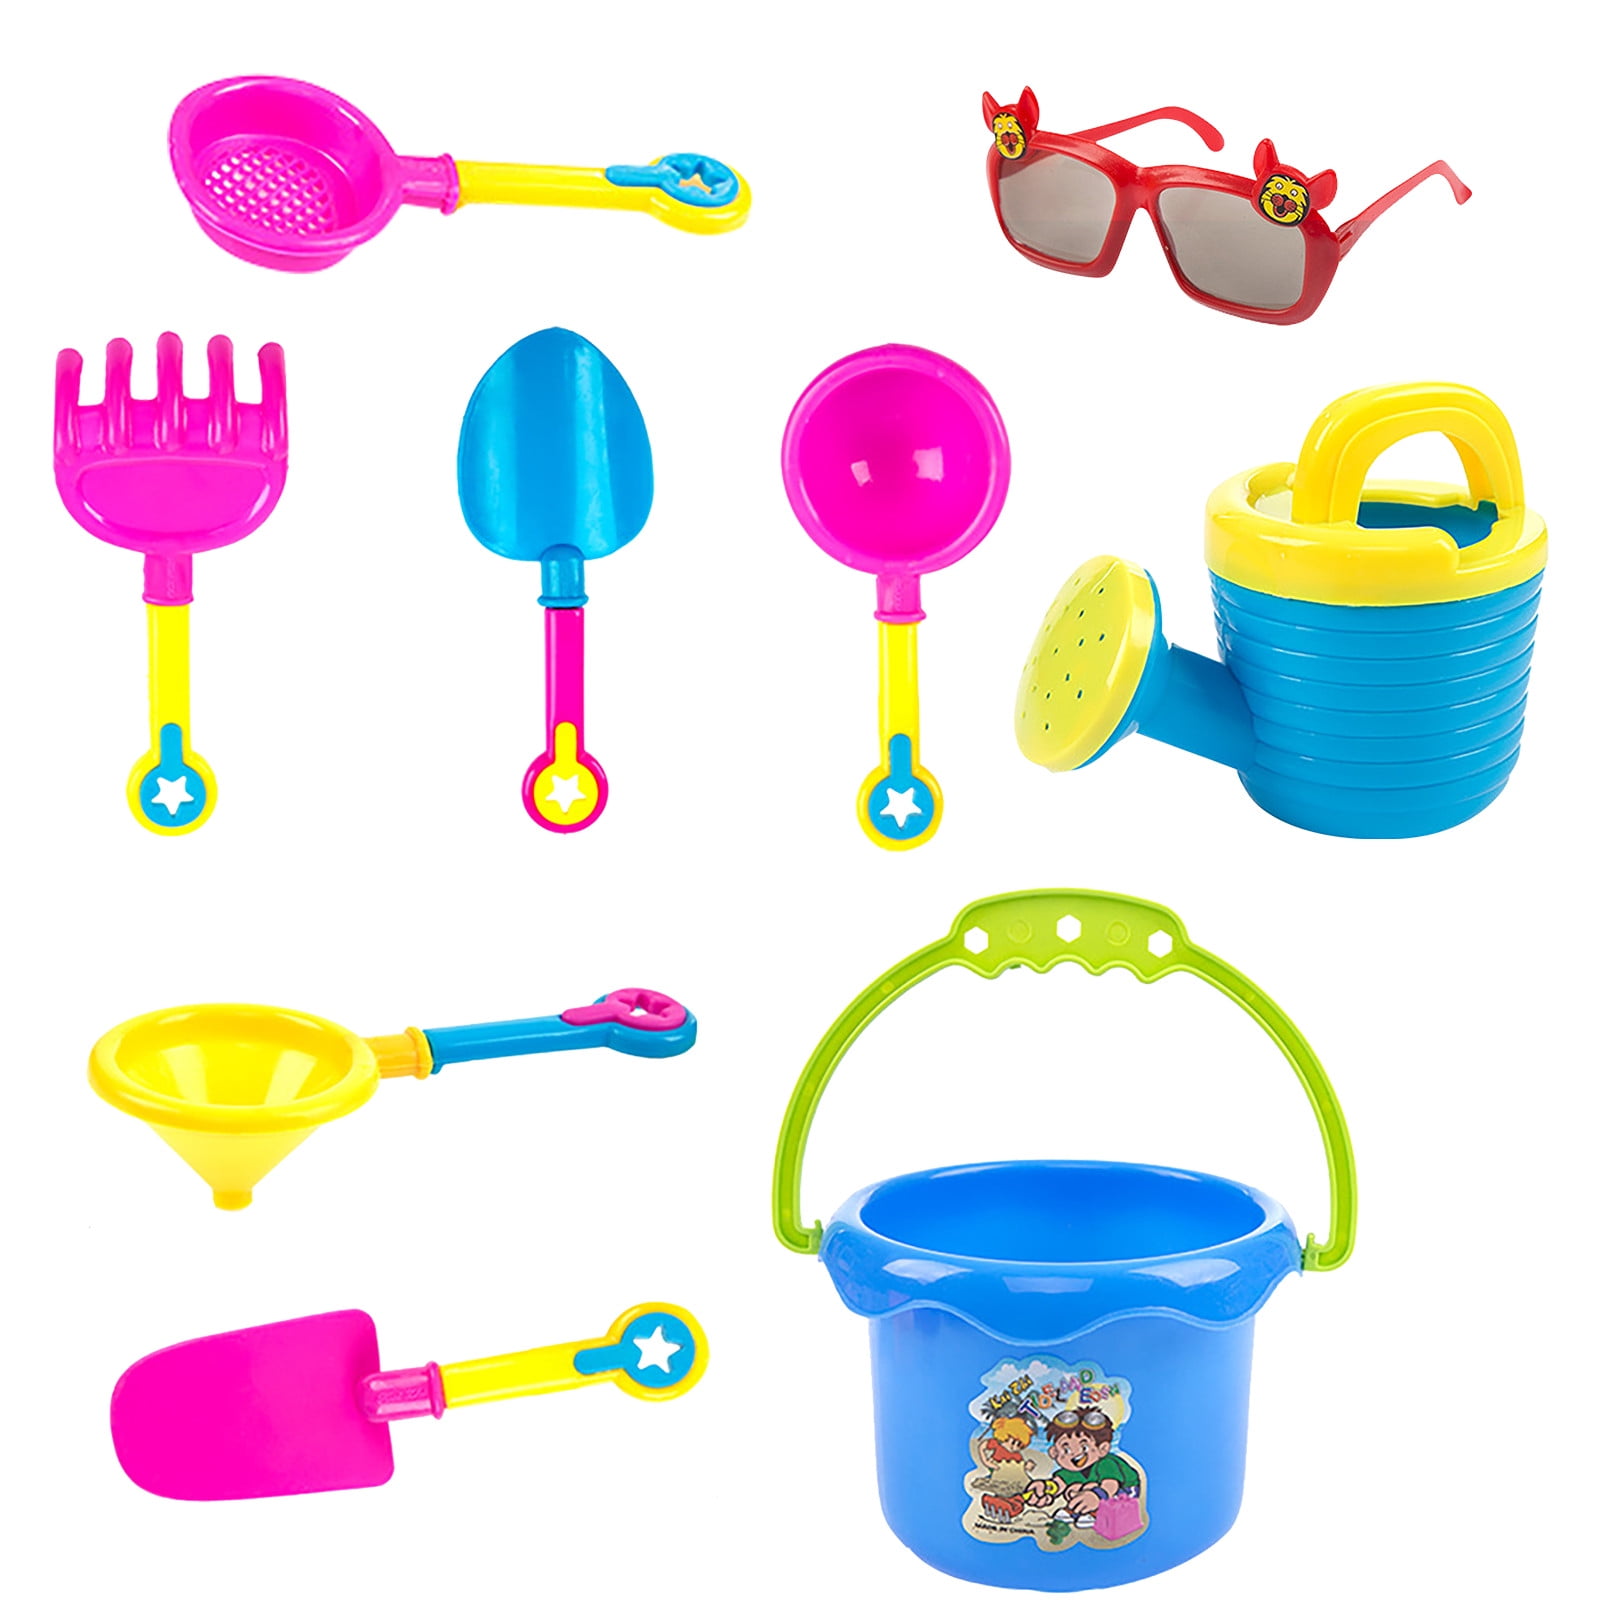 Details about   NEW PLAY DAY crab 6 PIECE SAND TOOL BEACH PAIL BASKET SET AGES 2+ 